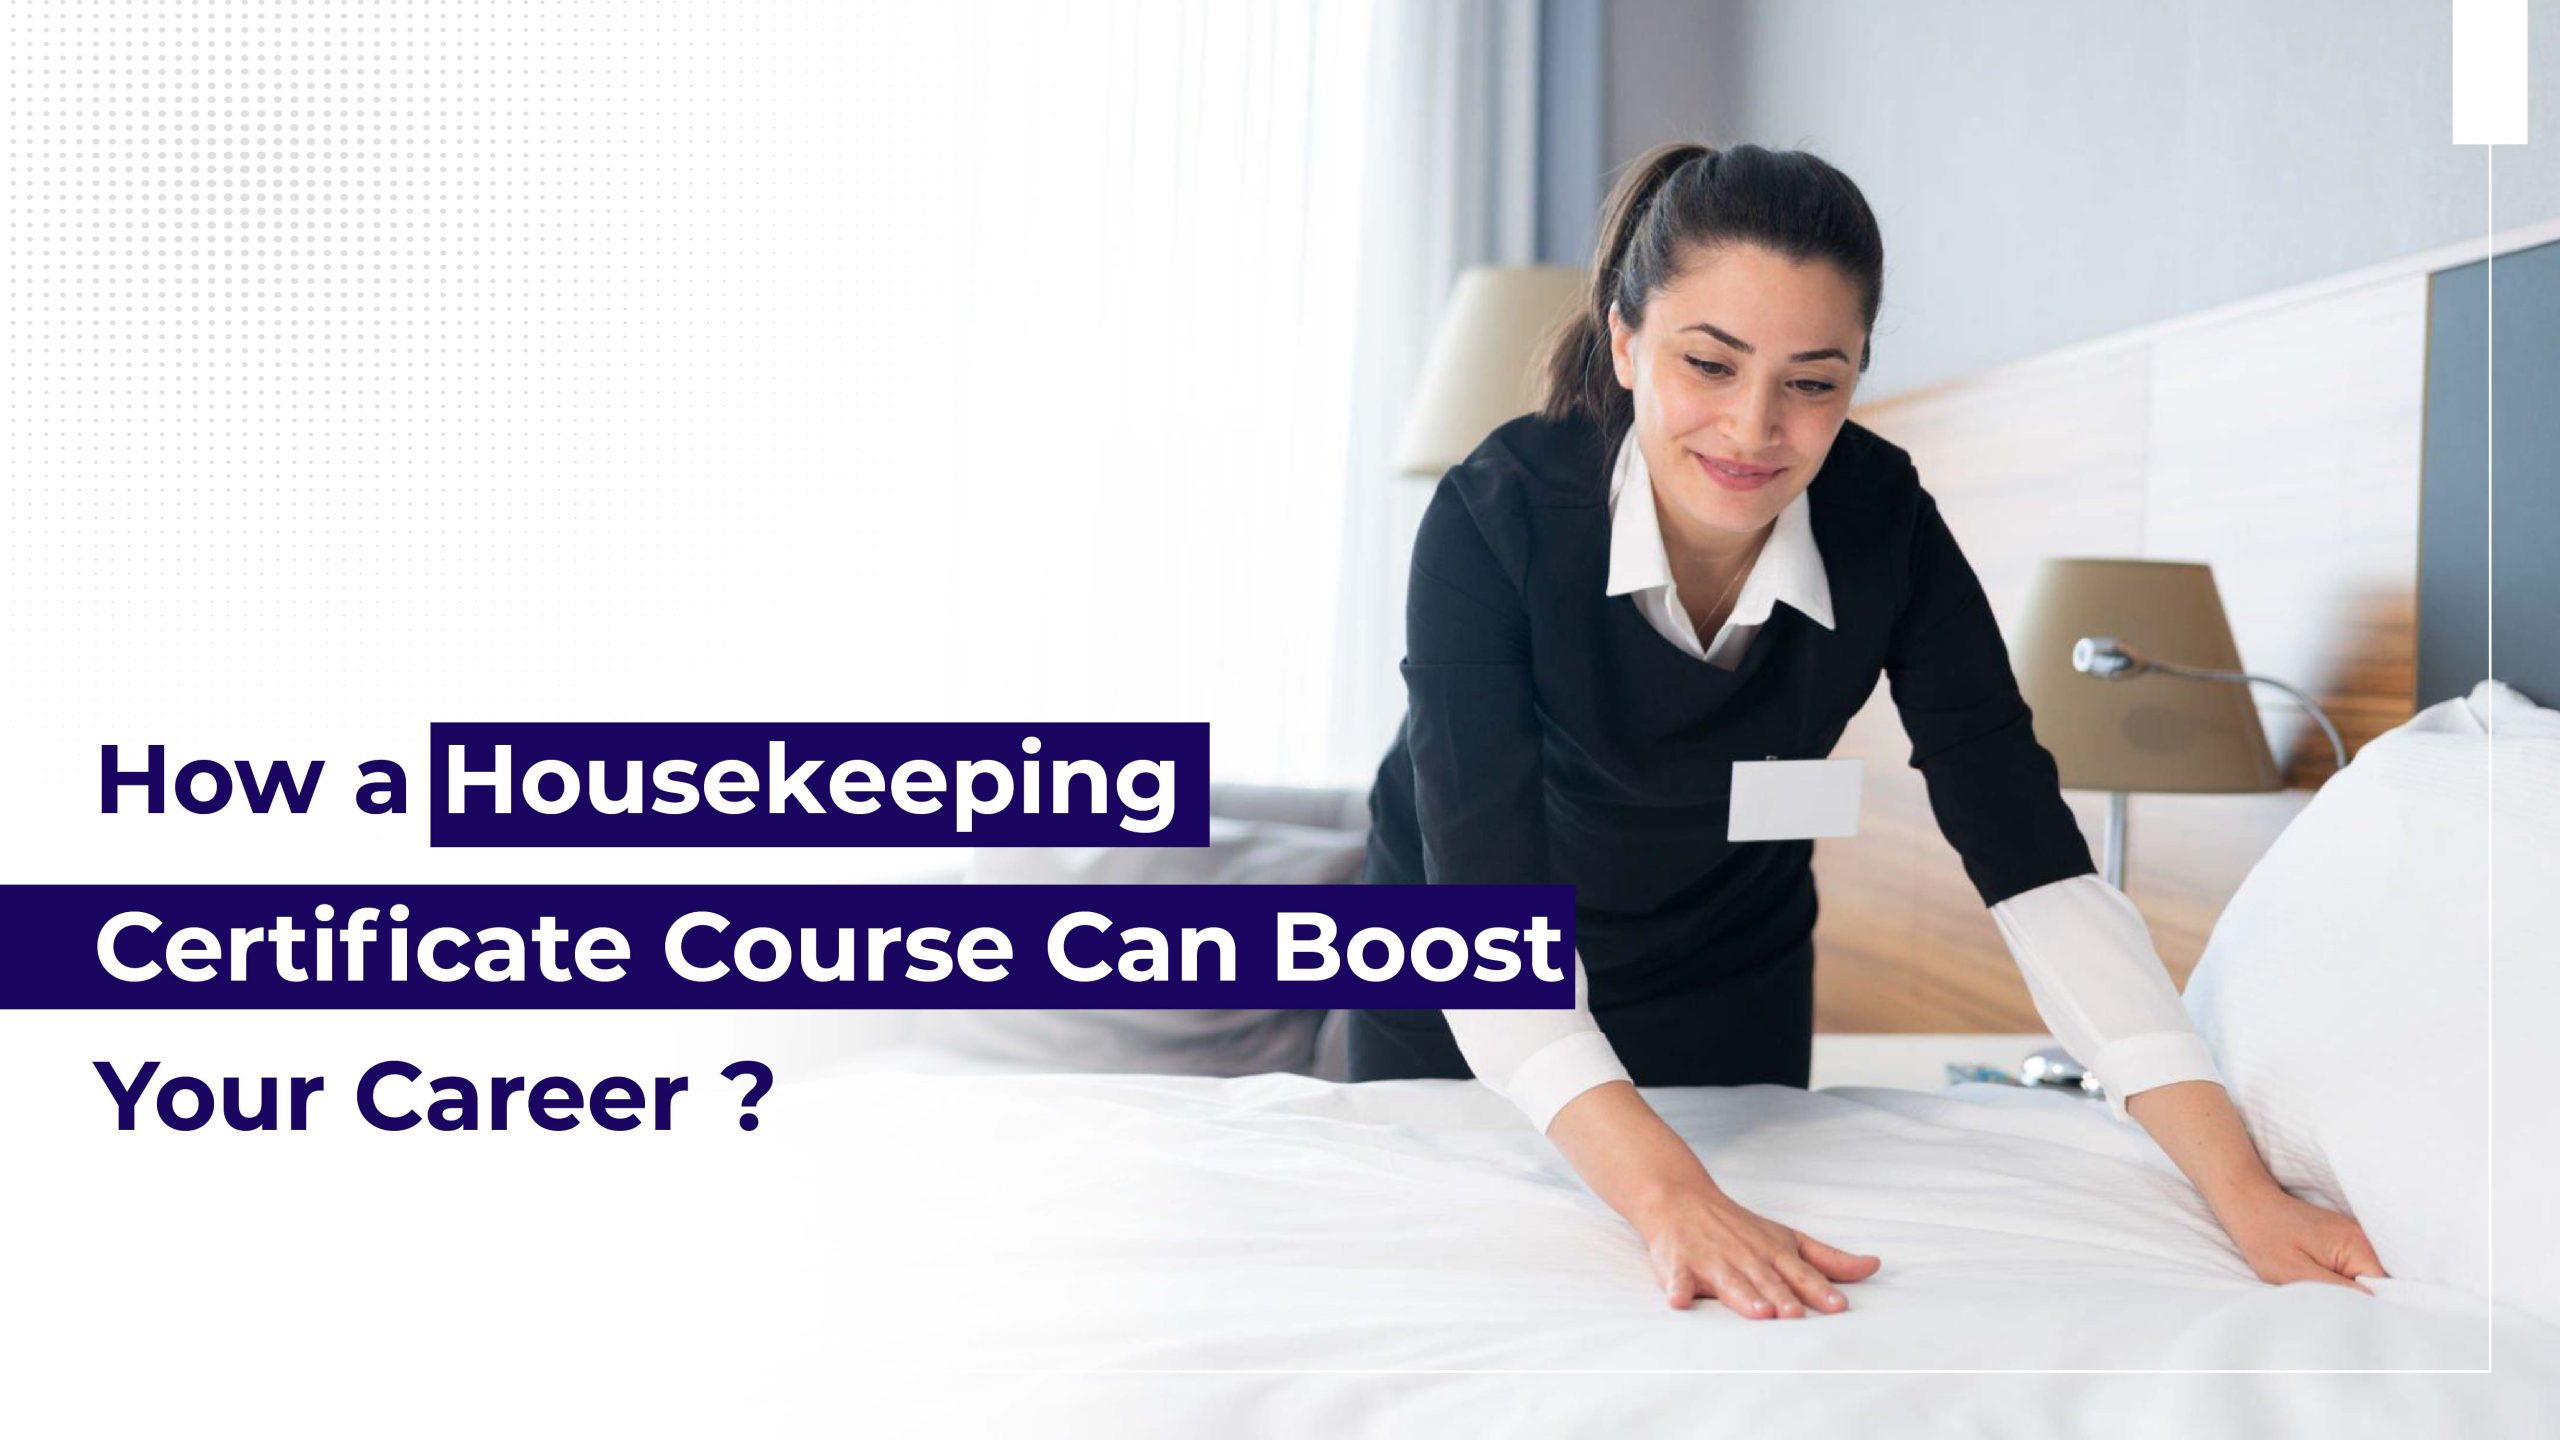 How a Housekeeping Certificate Course Can Boost Your Career?